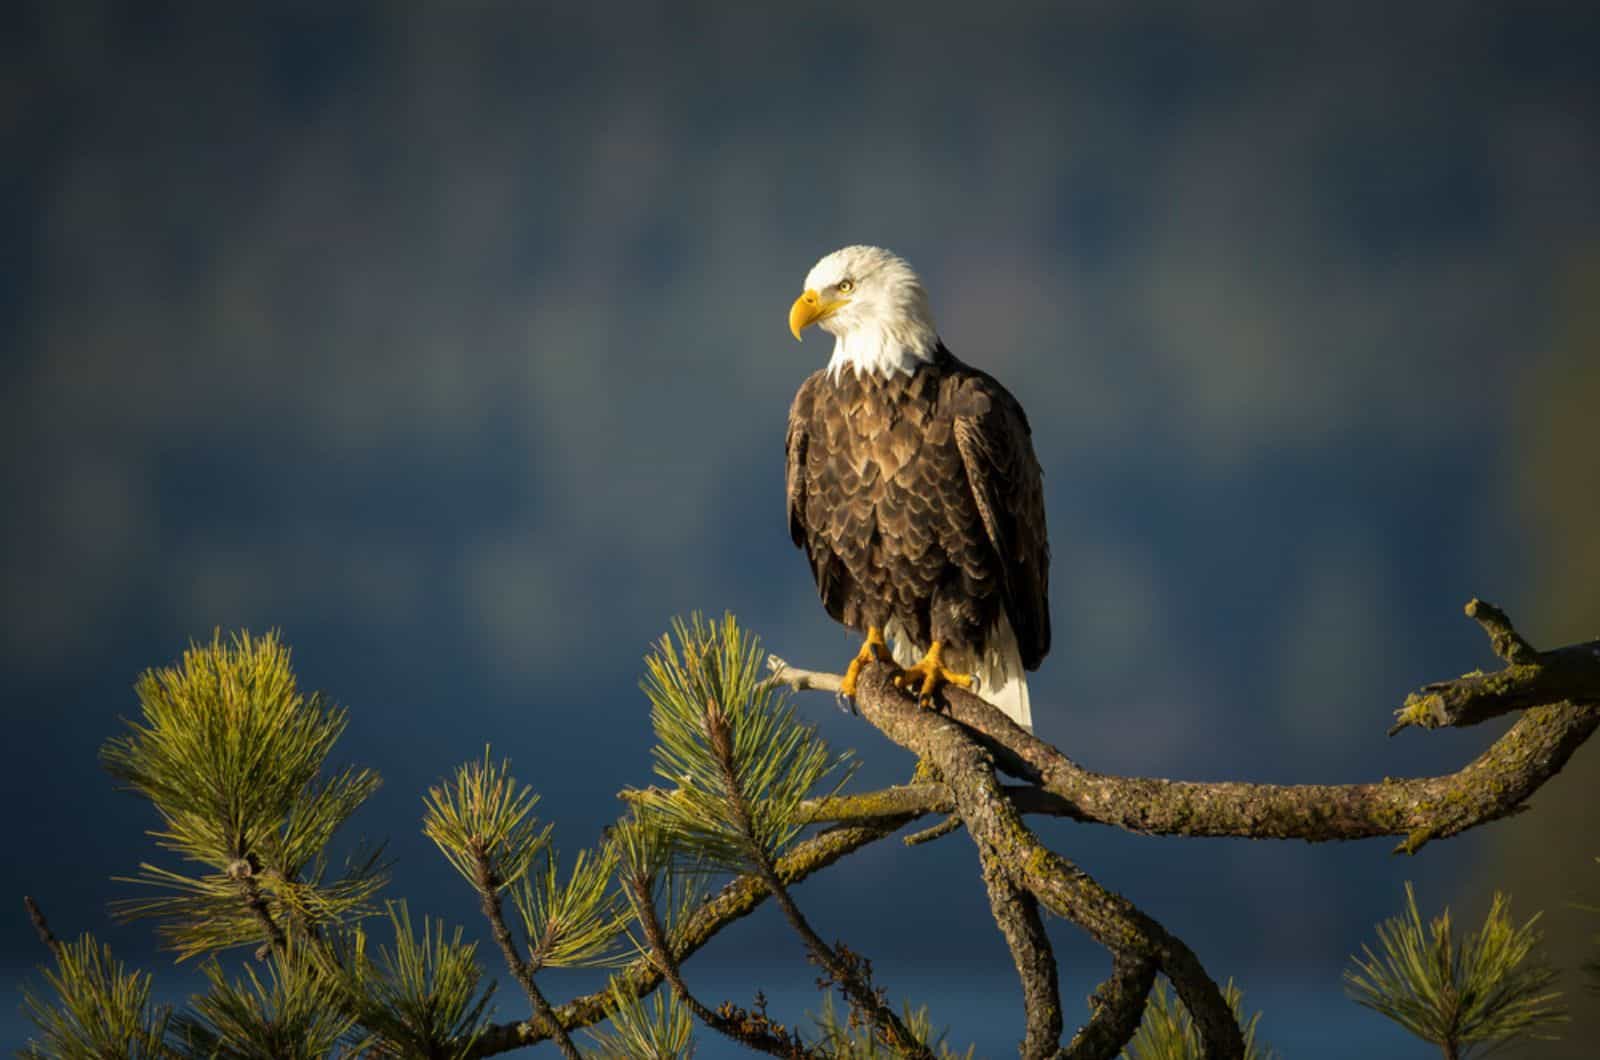 large bald eagle is perched on a large branch